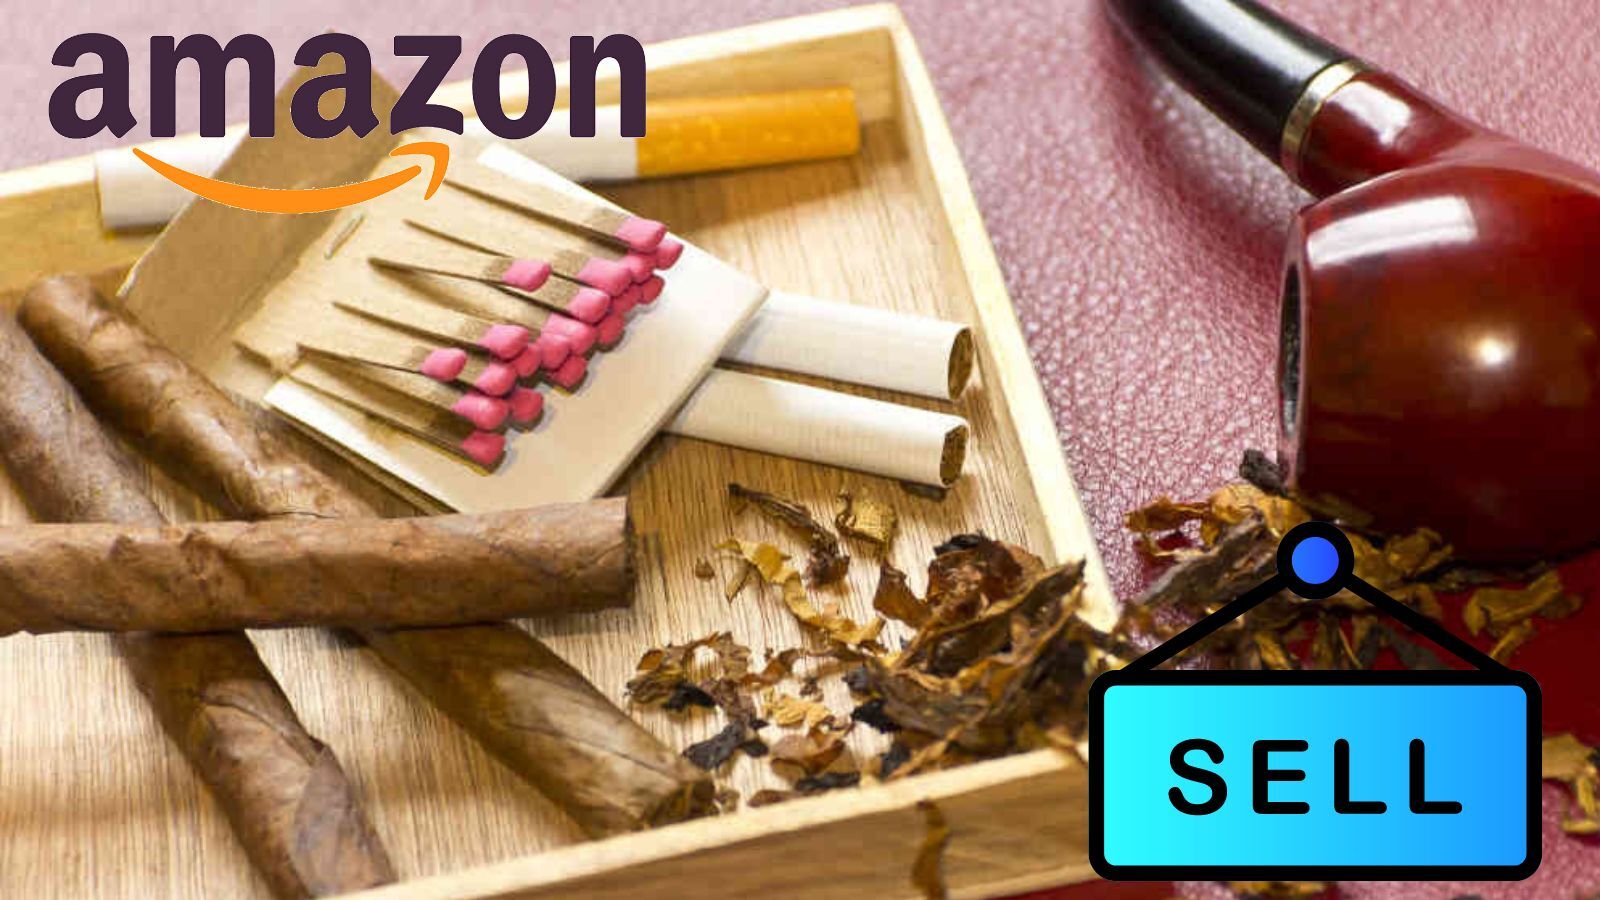 Does Amazon Sell Cigarettes, Cigars, and Tobacco Products? (Yes, But You Should Be Careful!)